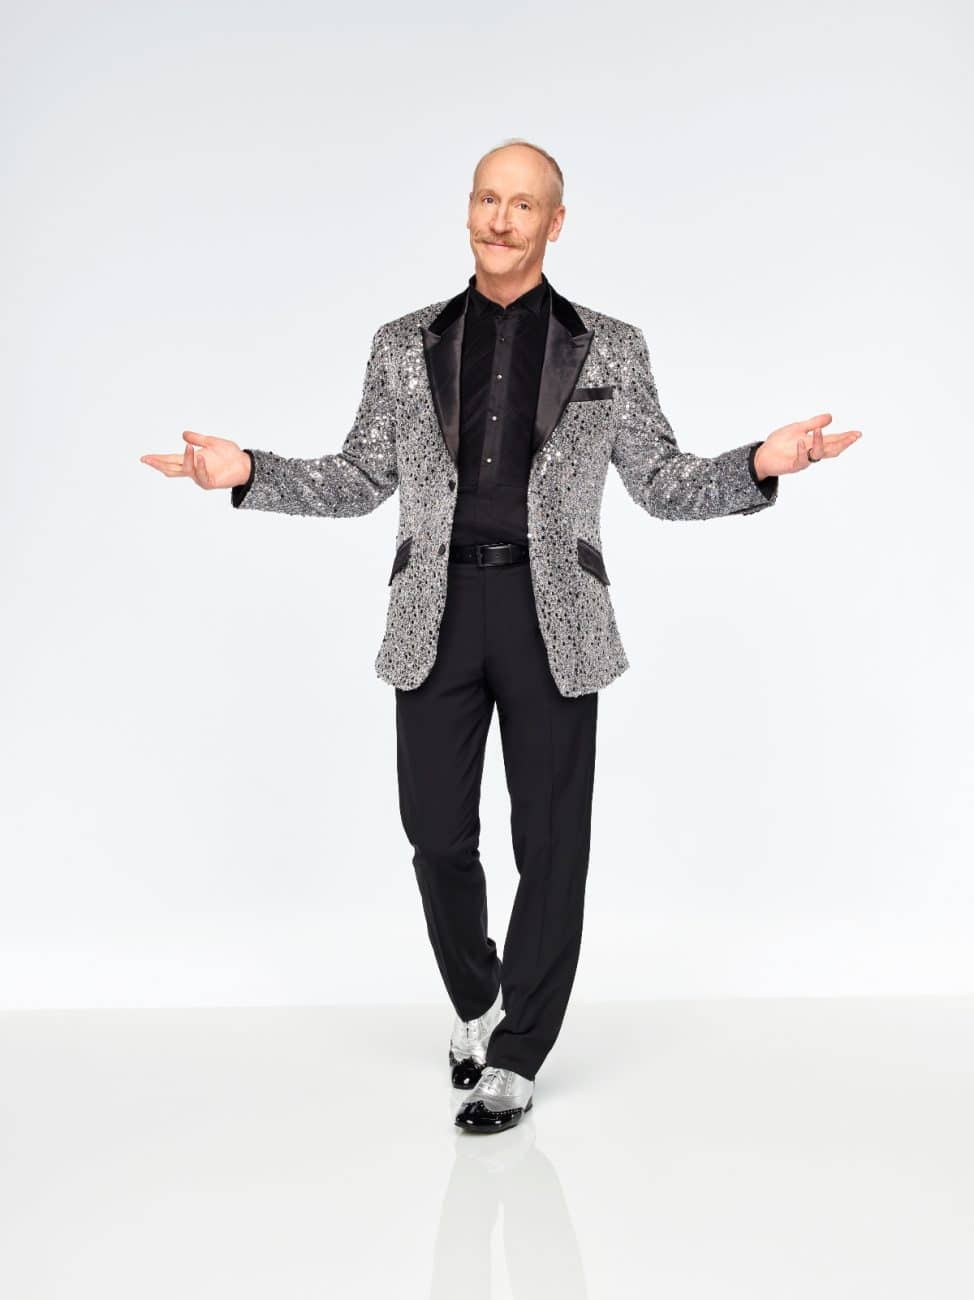 Matt Walsh on Dancing with the Stars